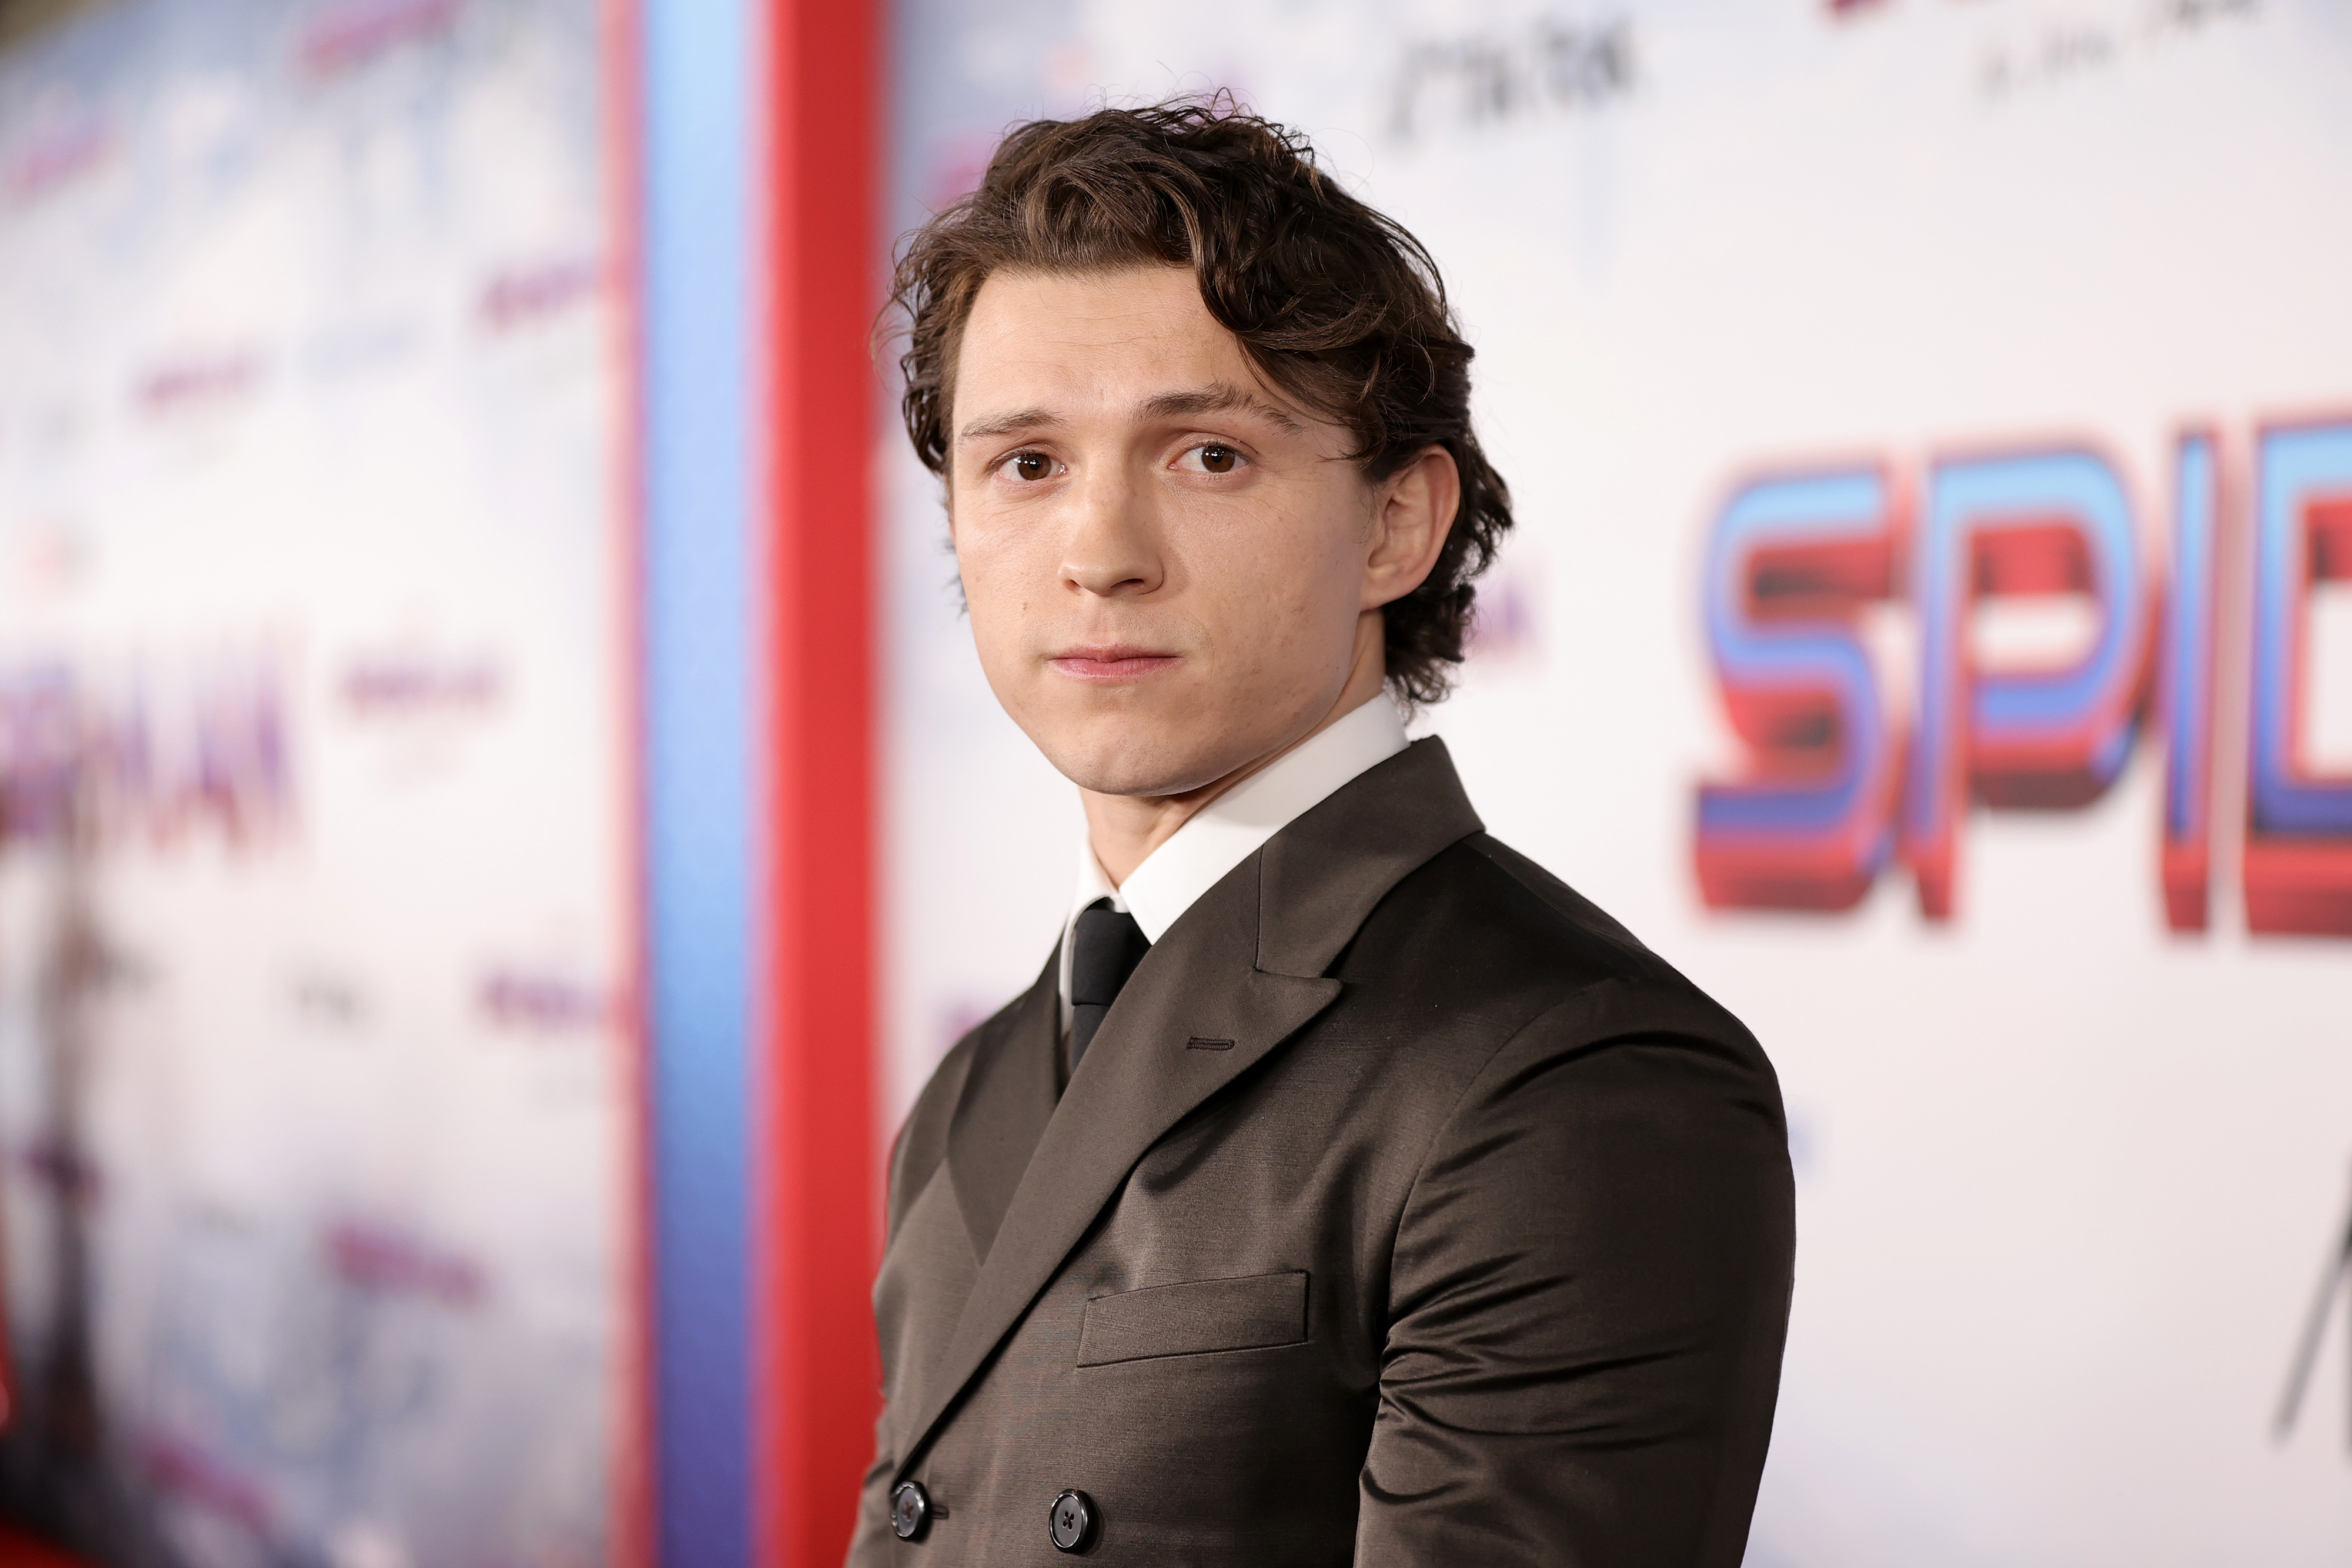 Close-up of Tom Holland in a suit and tie at a media event